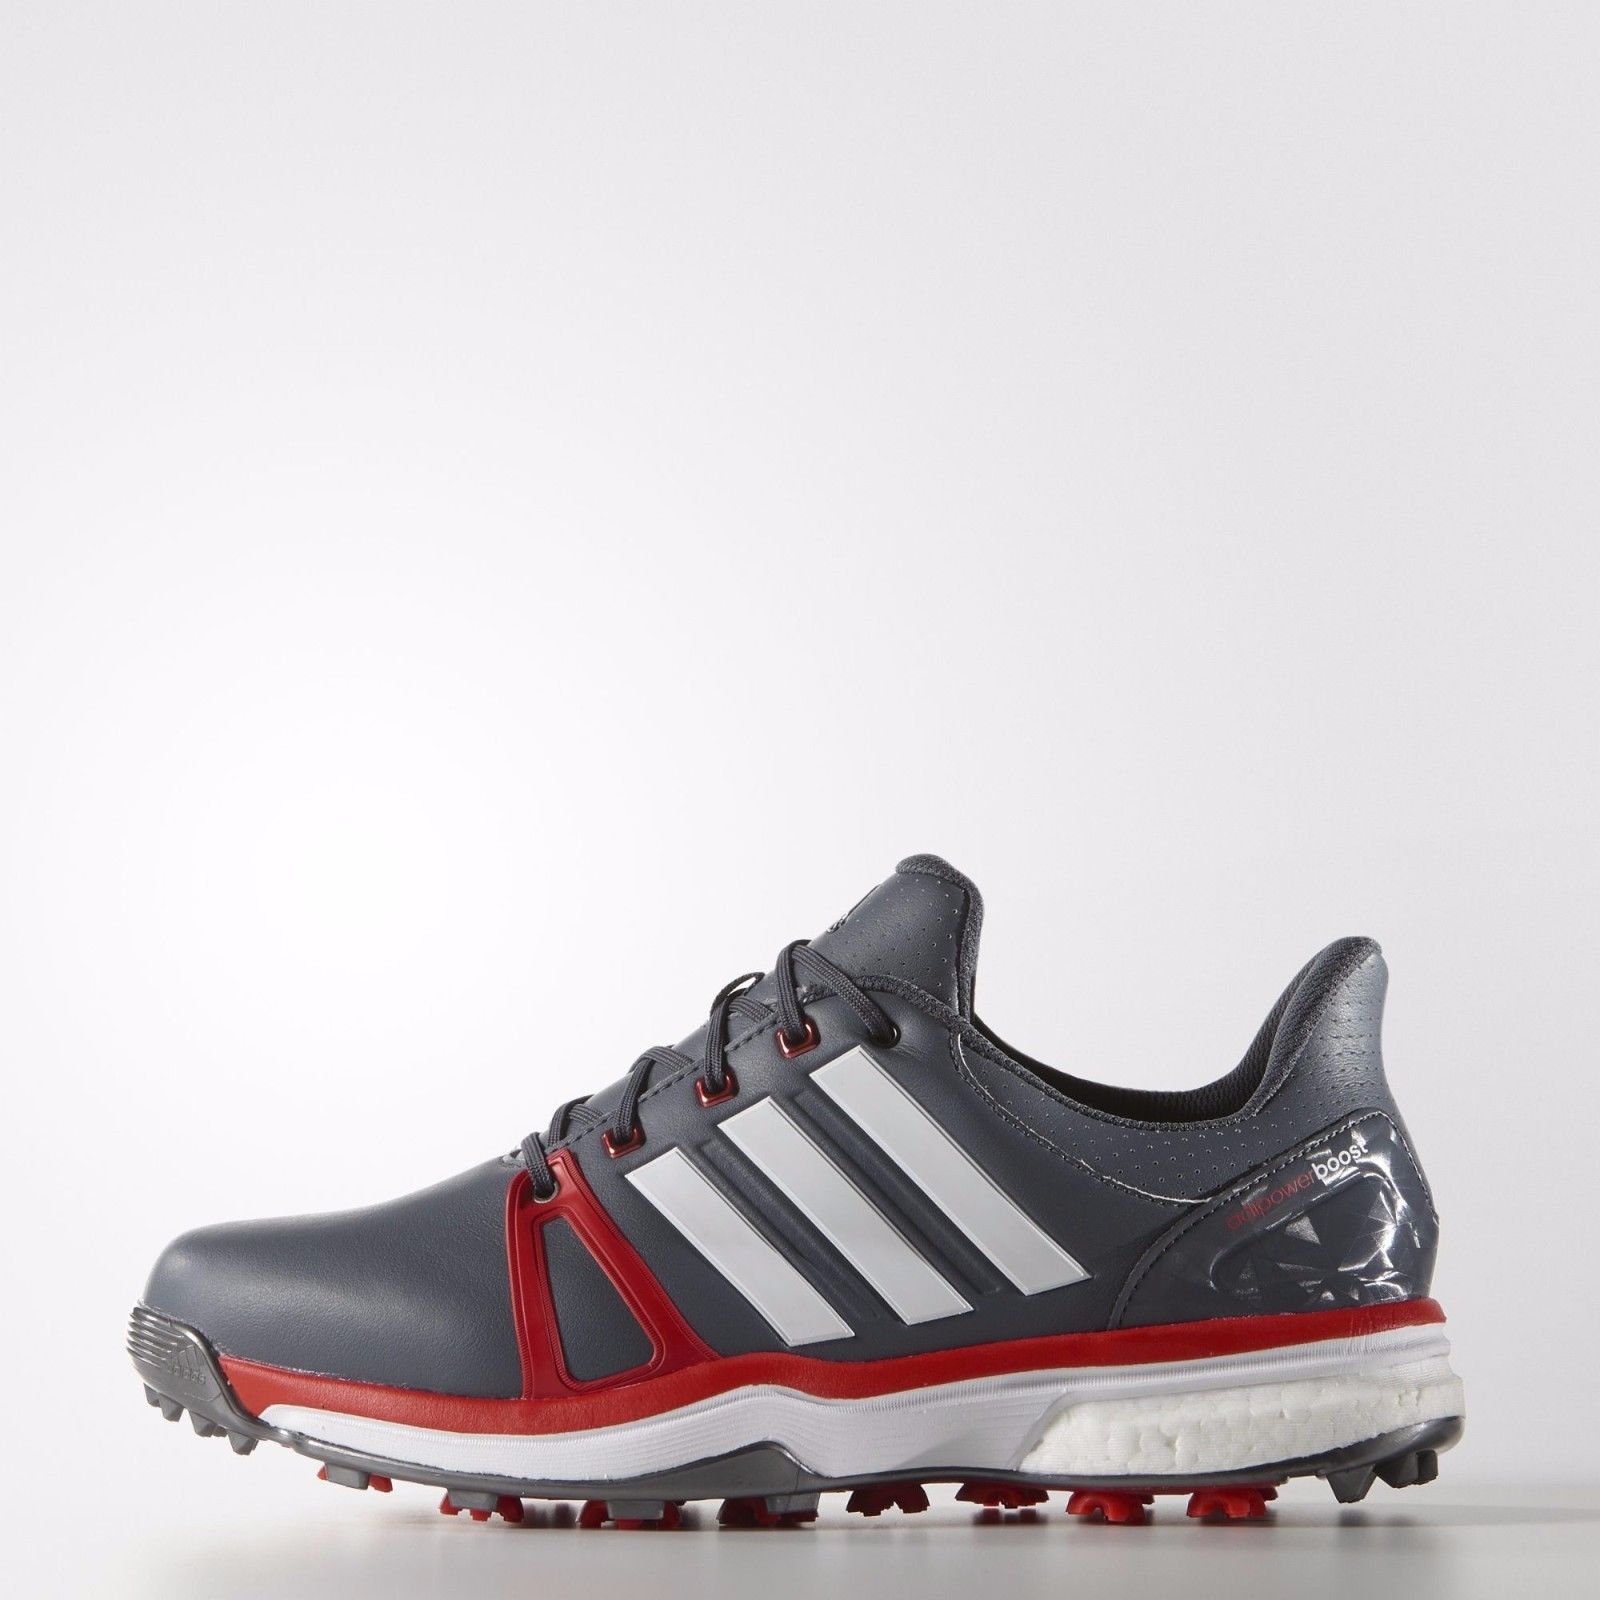 Adidas Adipower boost 2 WD Golf Shoes 2 Year Waterproof 2016 Q44667  Onix/Red - Golf Trousers and Clothing